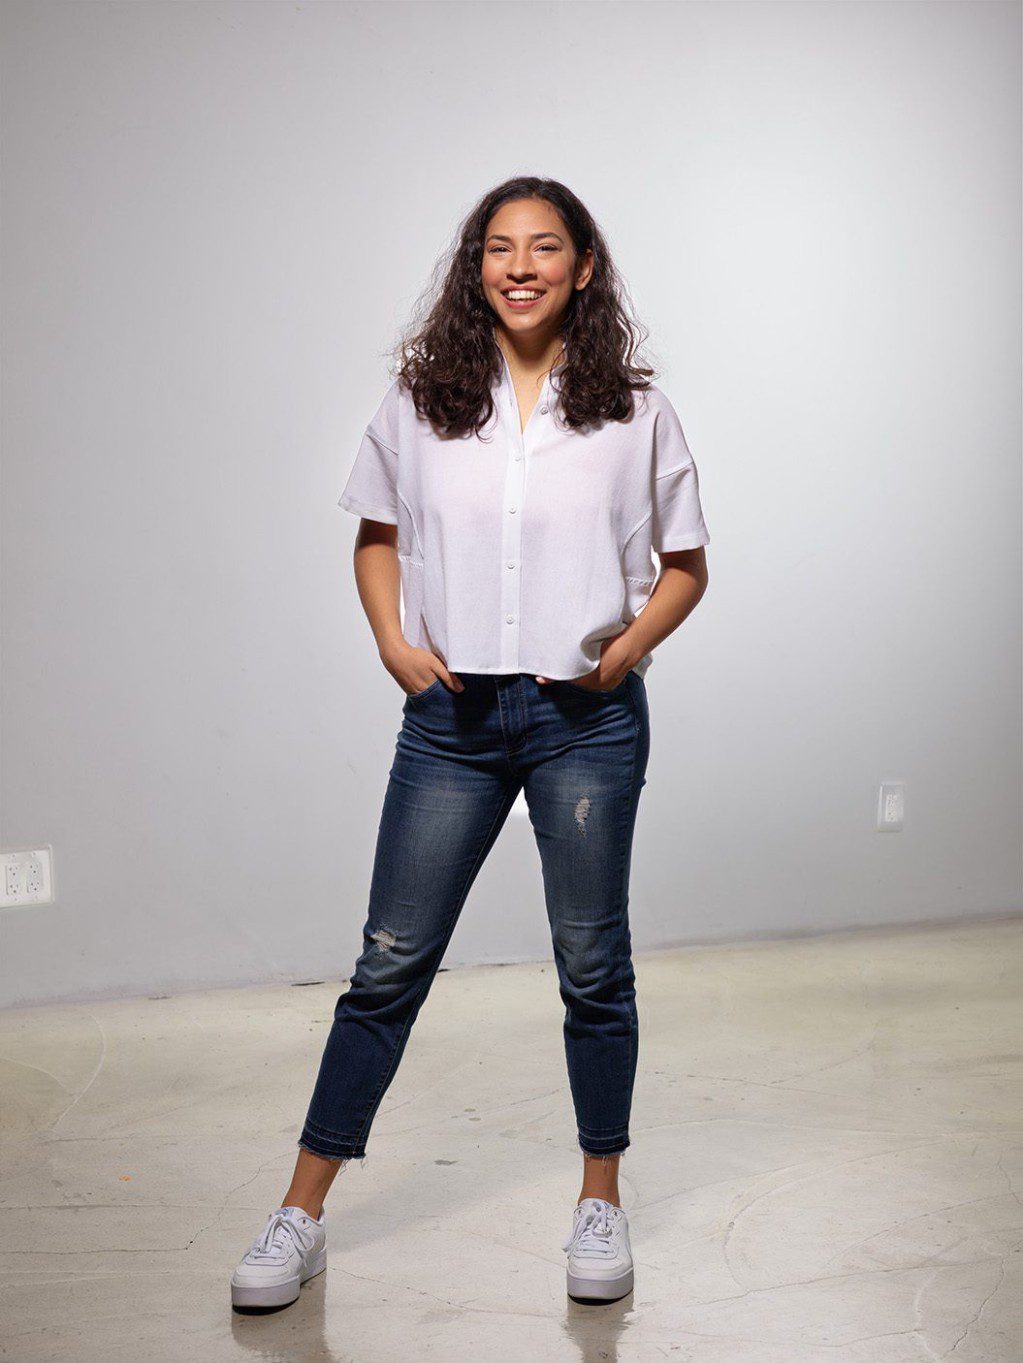 Zara poses for the camera; she has long brown curly hair, brown eyes and skin, wearing a white top and blue jeans, with her hands in her pockets.